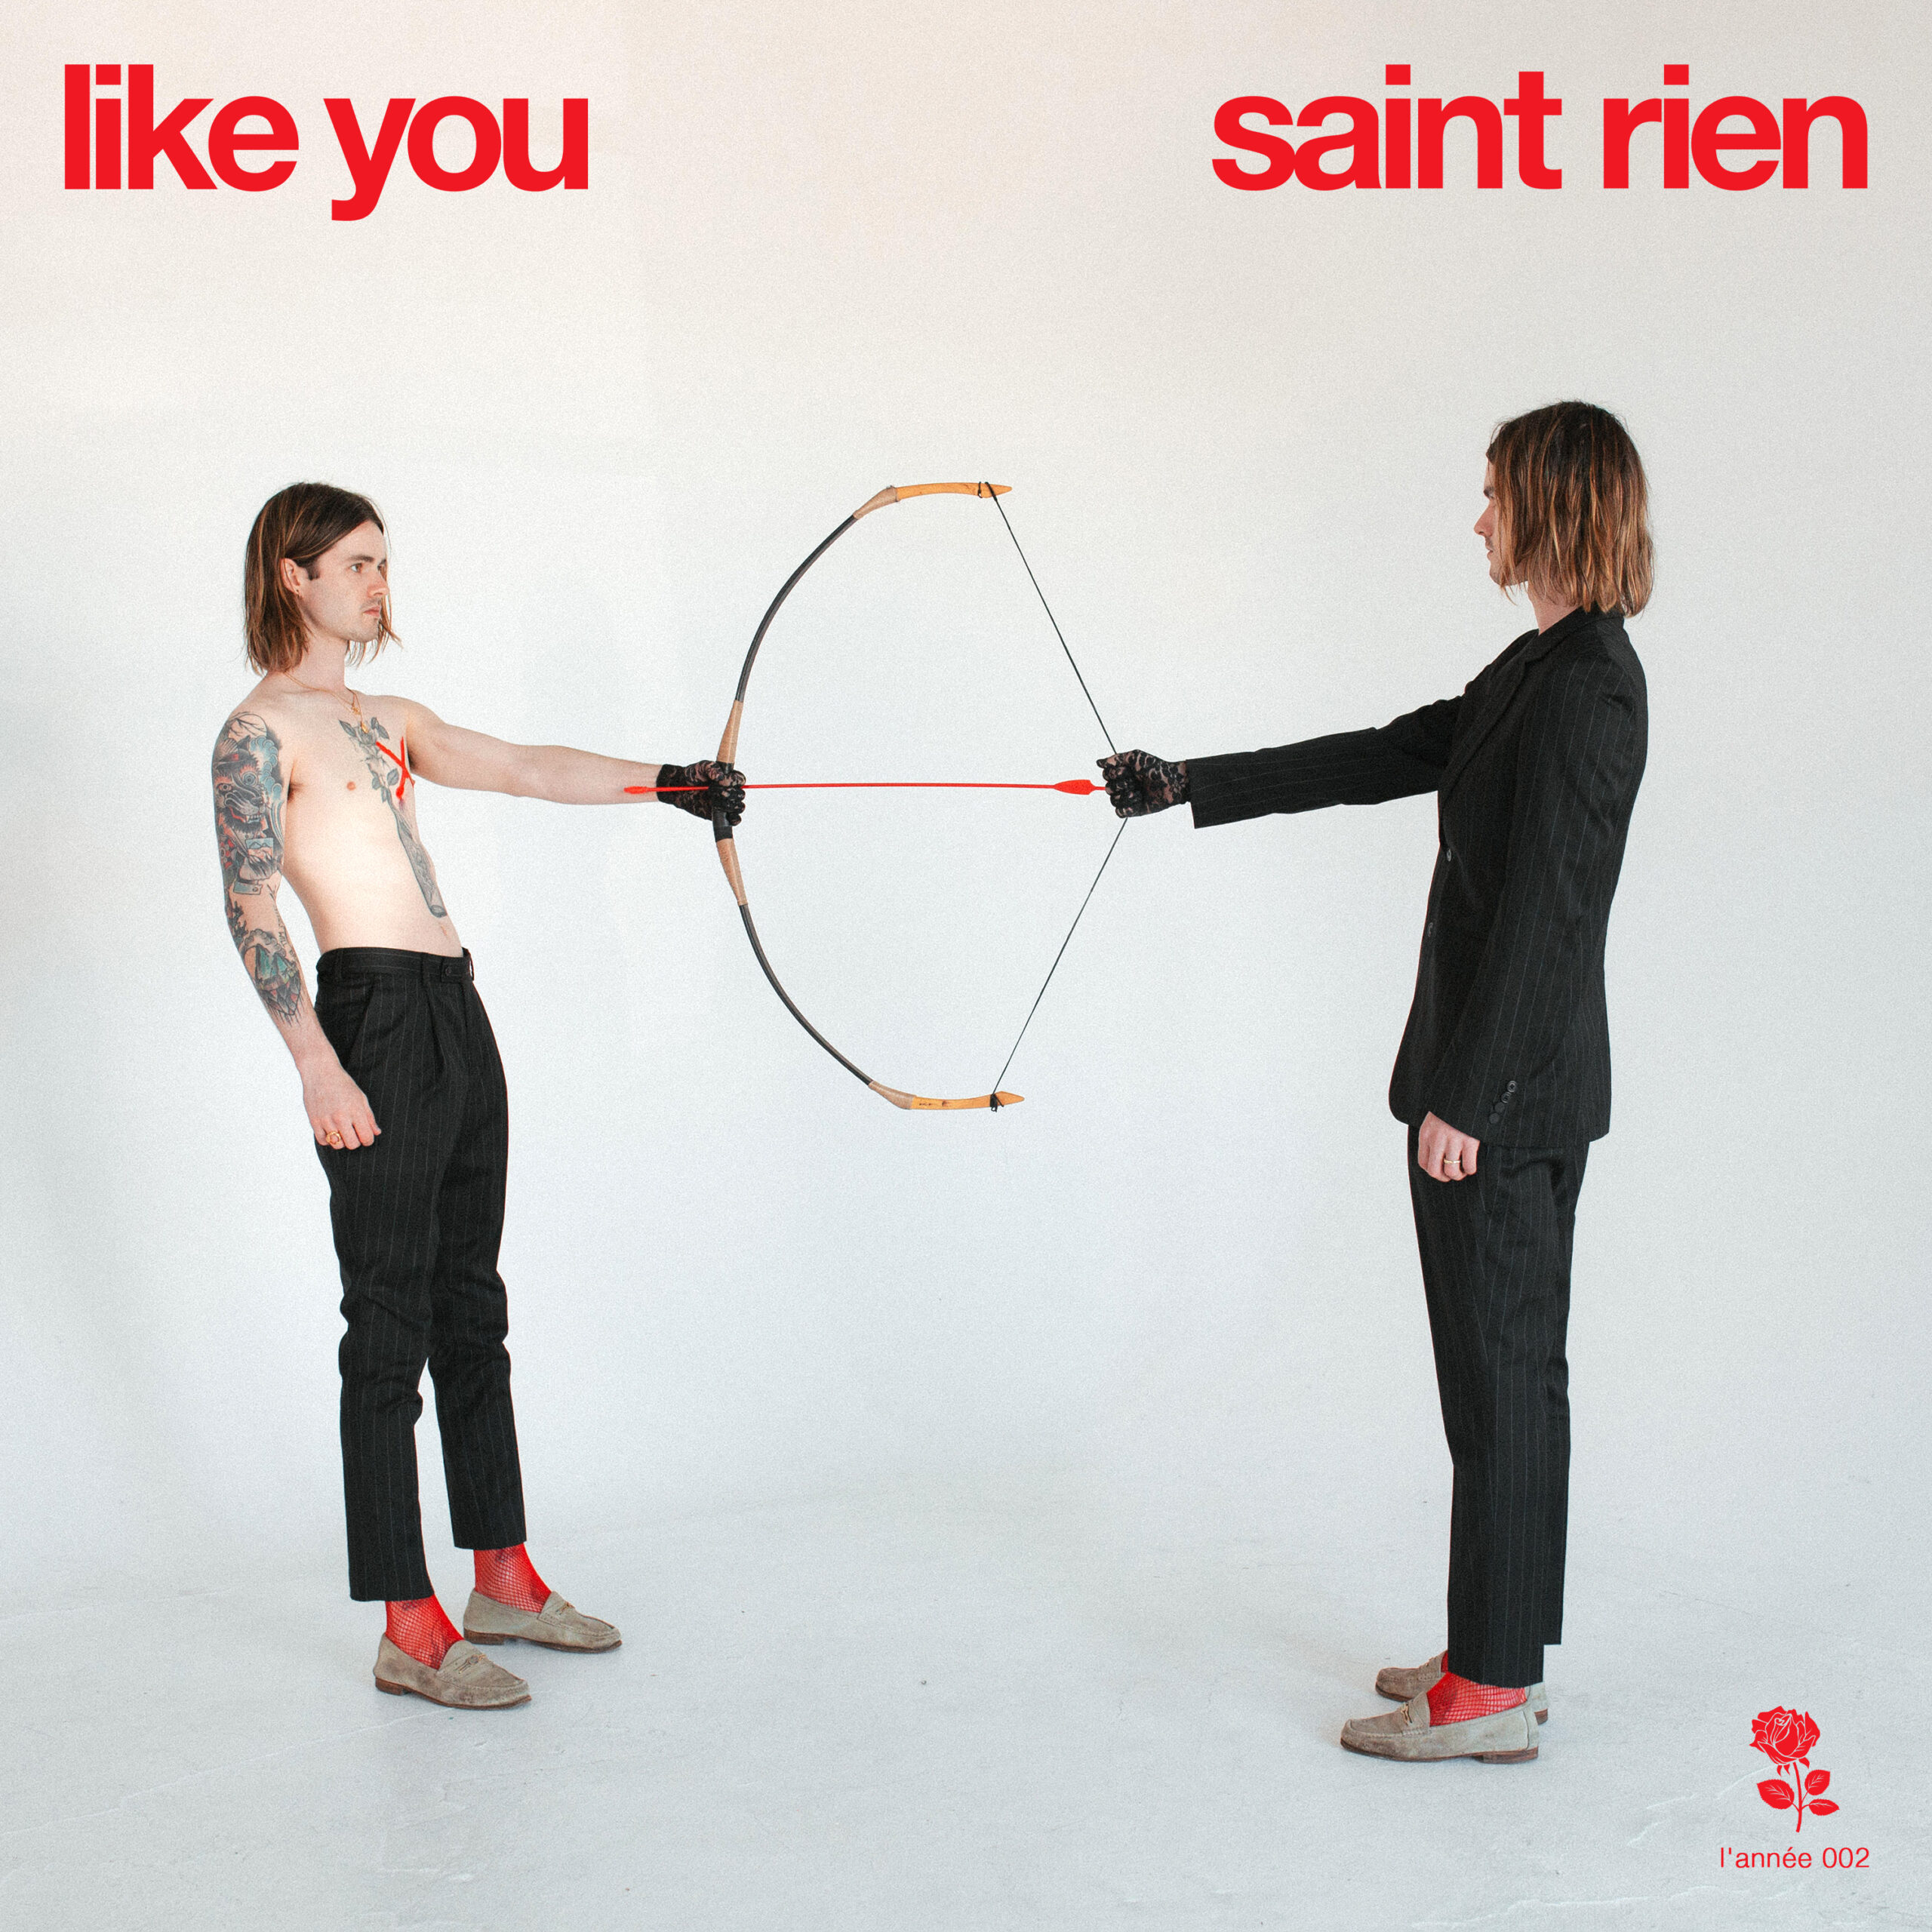 Saint Rien Takes An Emotional Turn with New Single “Like You”